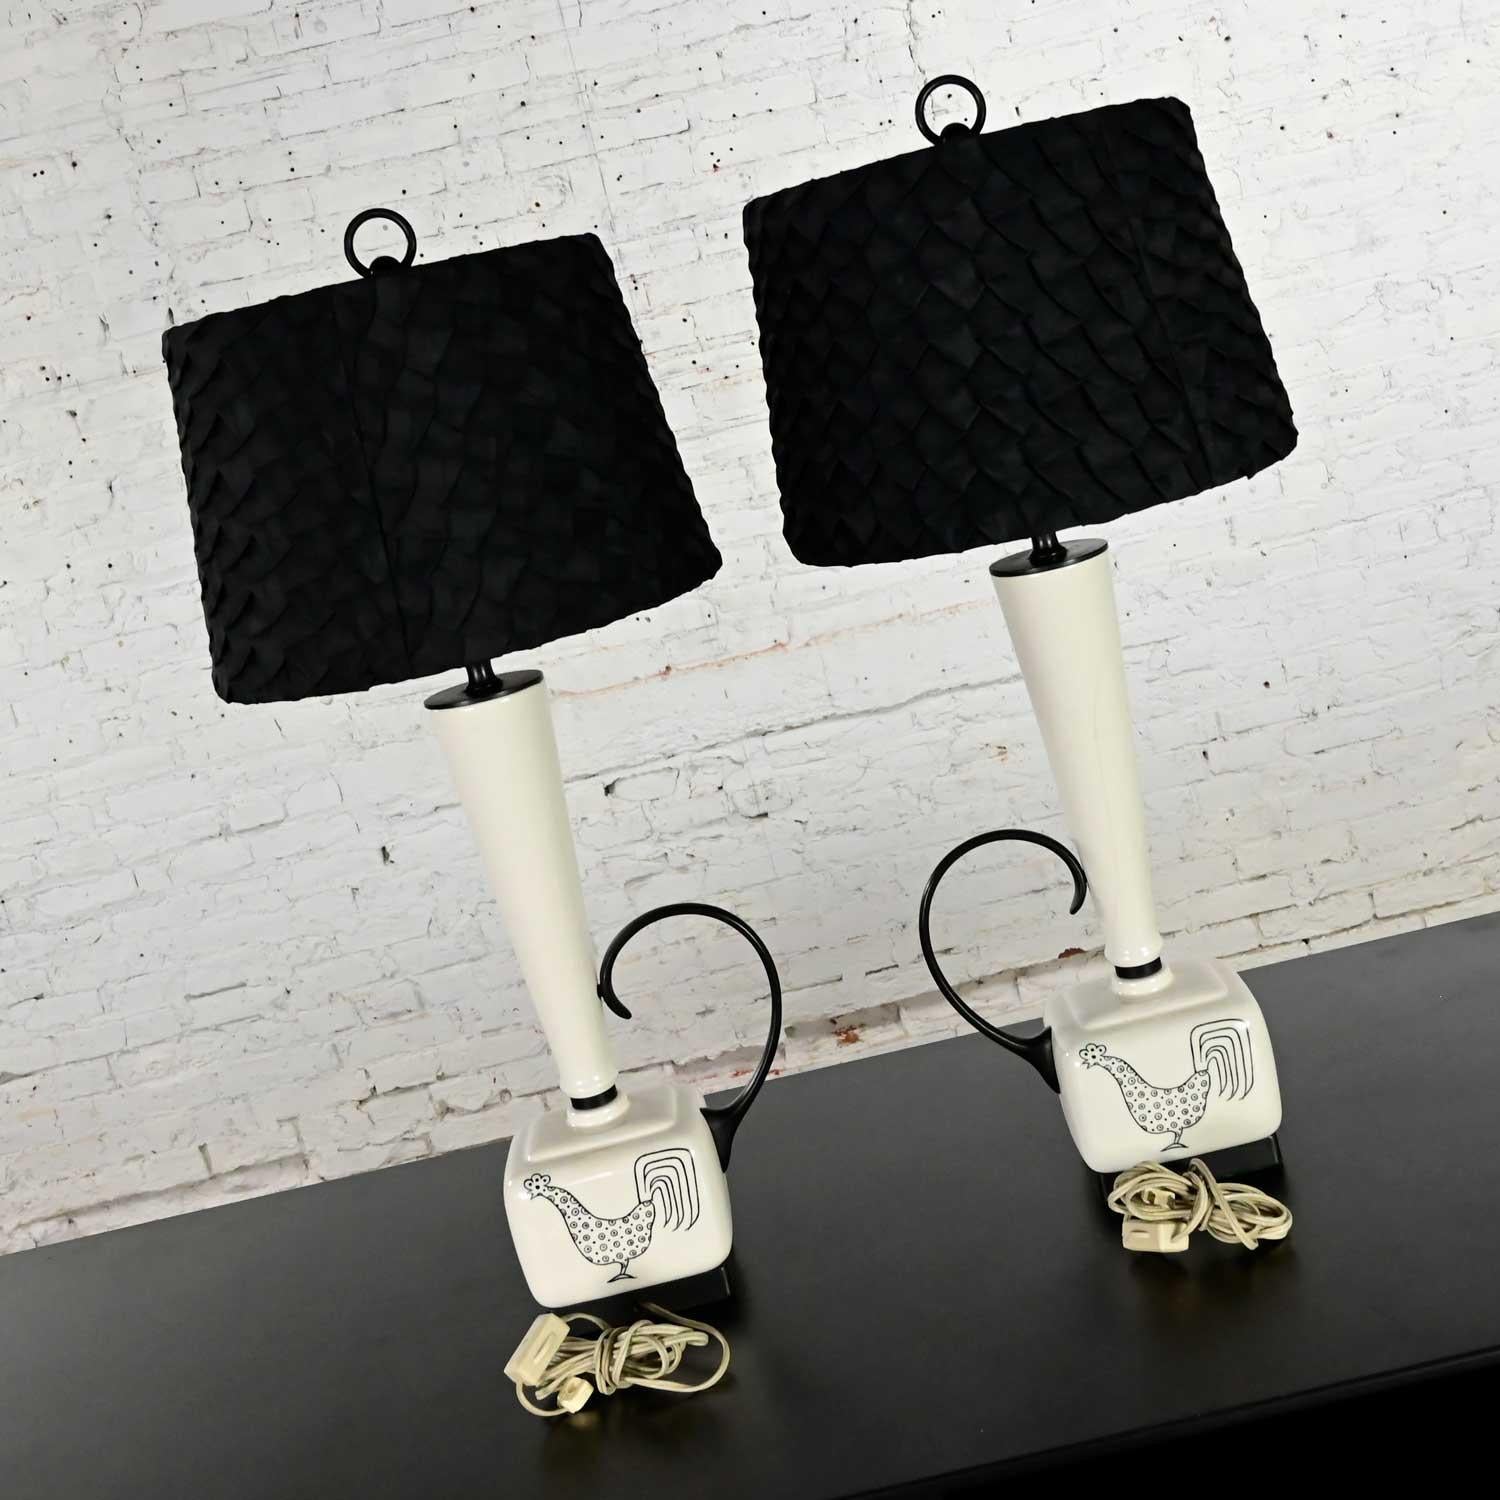 Mid-Century Modern Black and White Ceramic Lamps w/ Rooster Design, a Pair In Good Condition For Sale In Topeka, KS